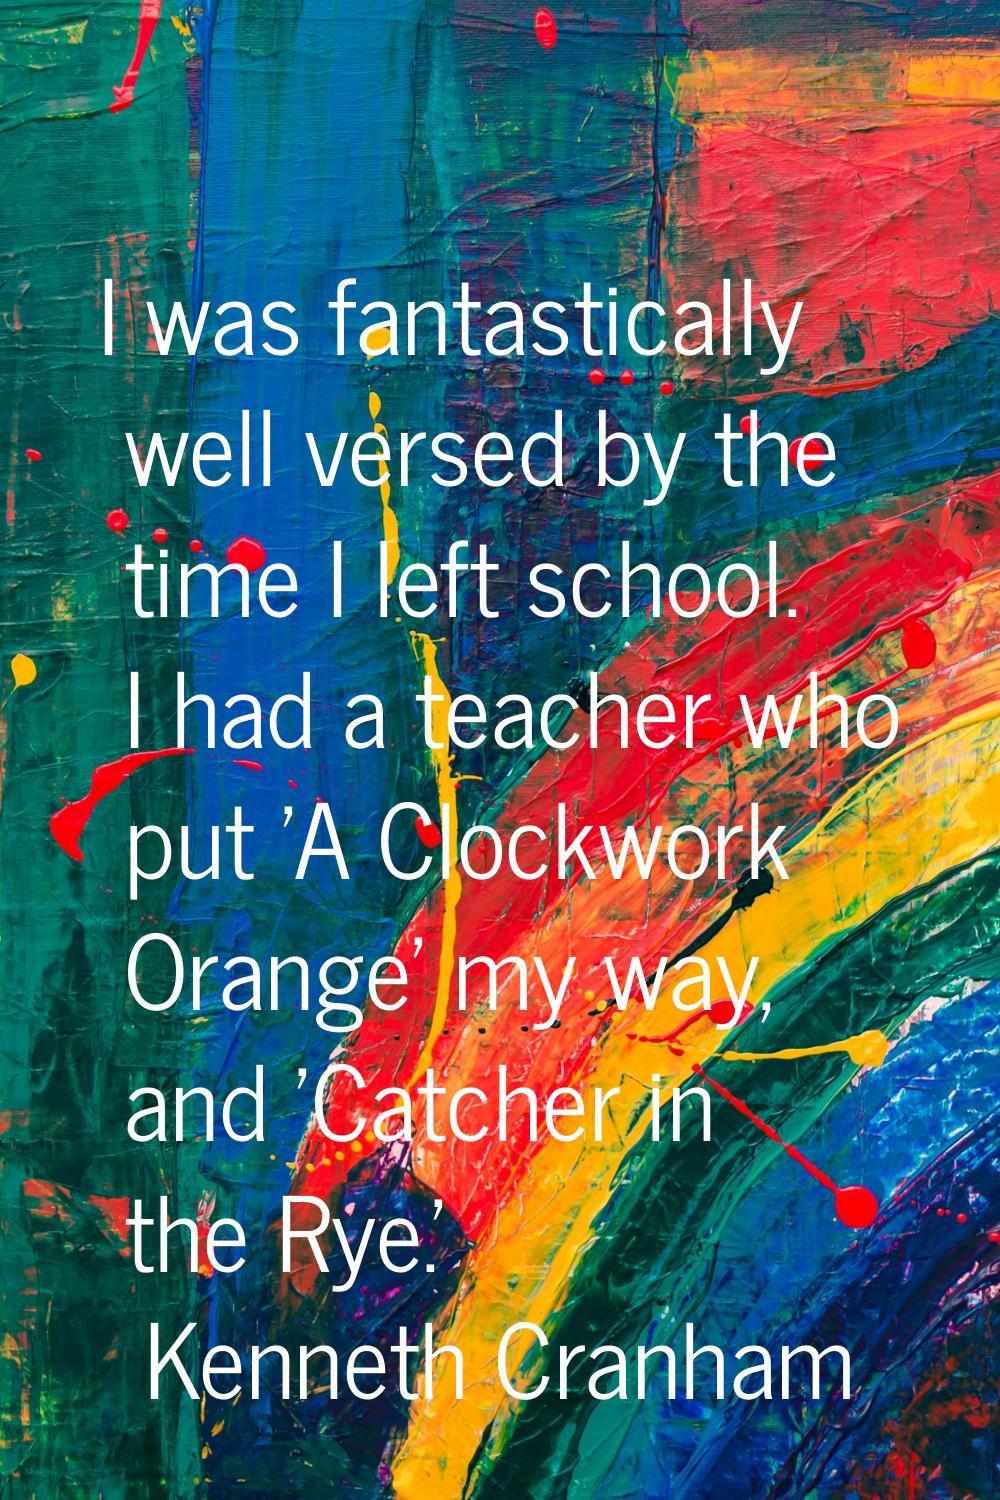 I was fantastically well versed by the time I left school. I had a teacher who put 'A Clockwork Ora